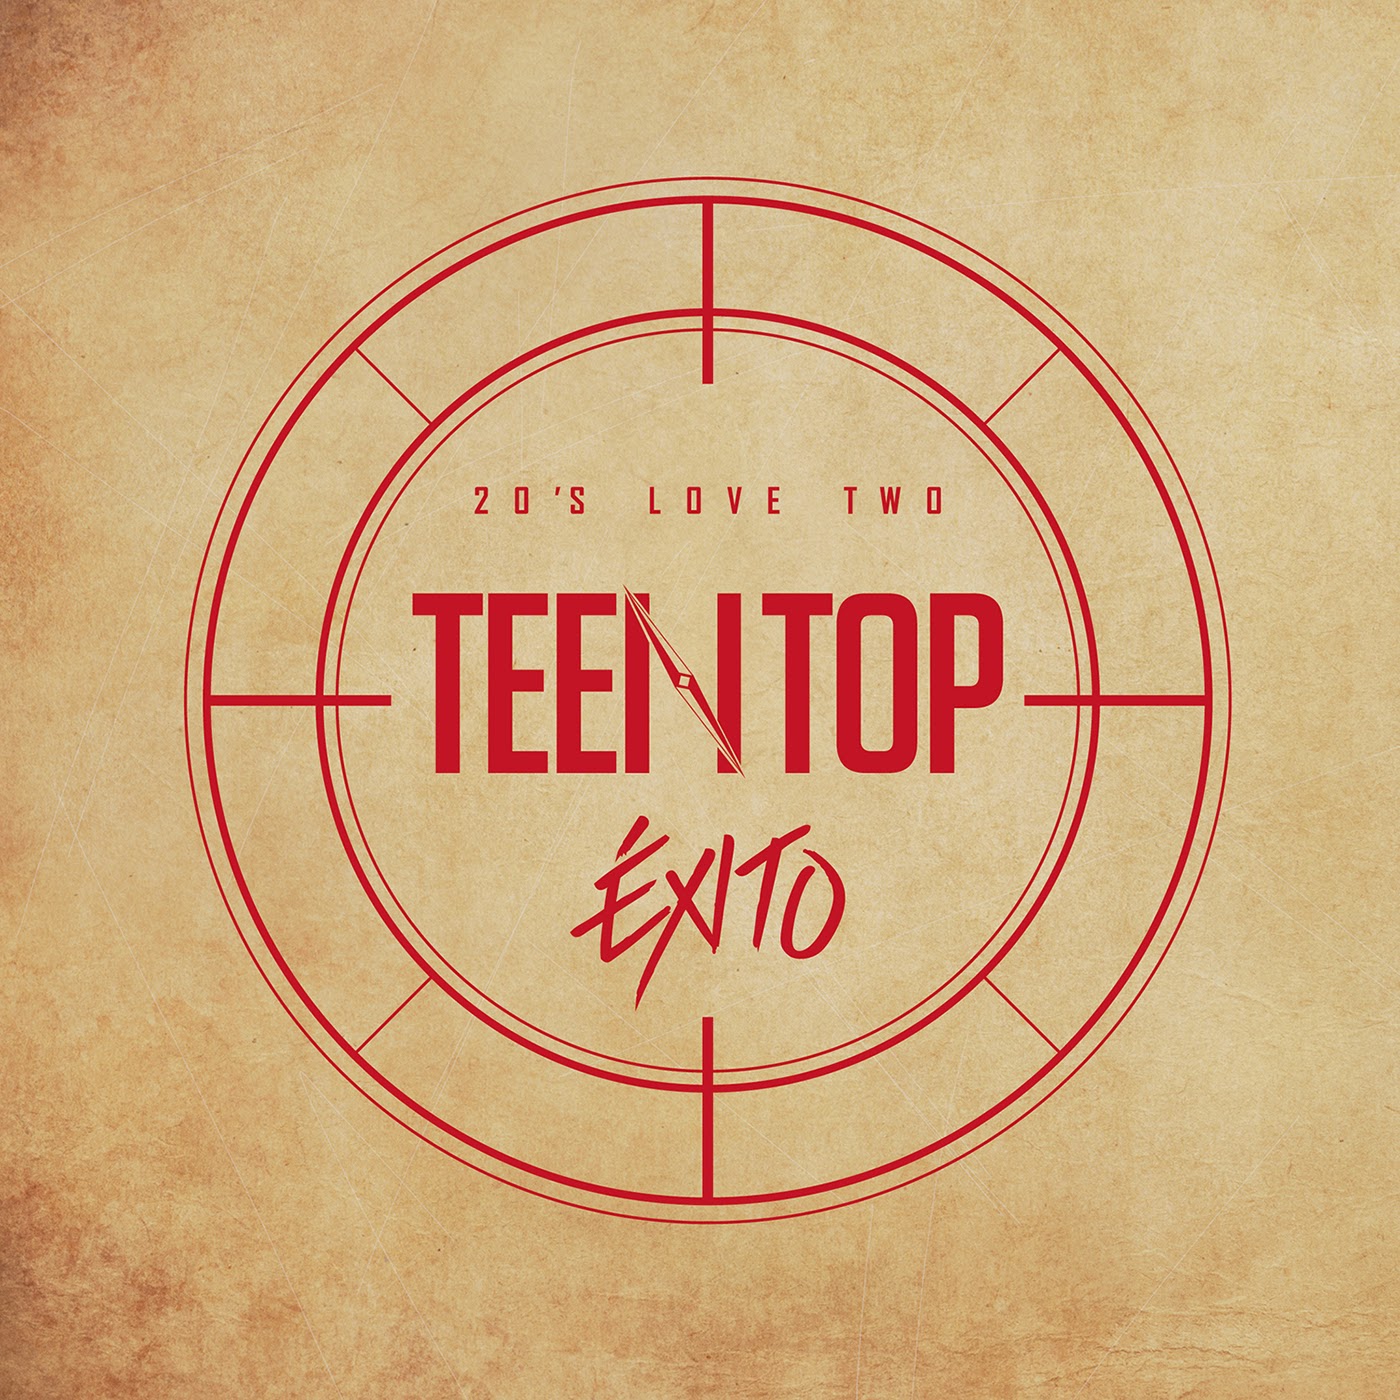 download full album teen top teen top 20s Love Two Exito (repackage) mp3